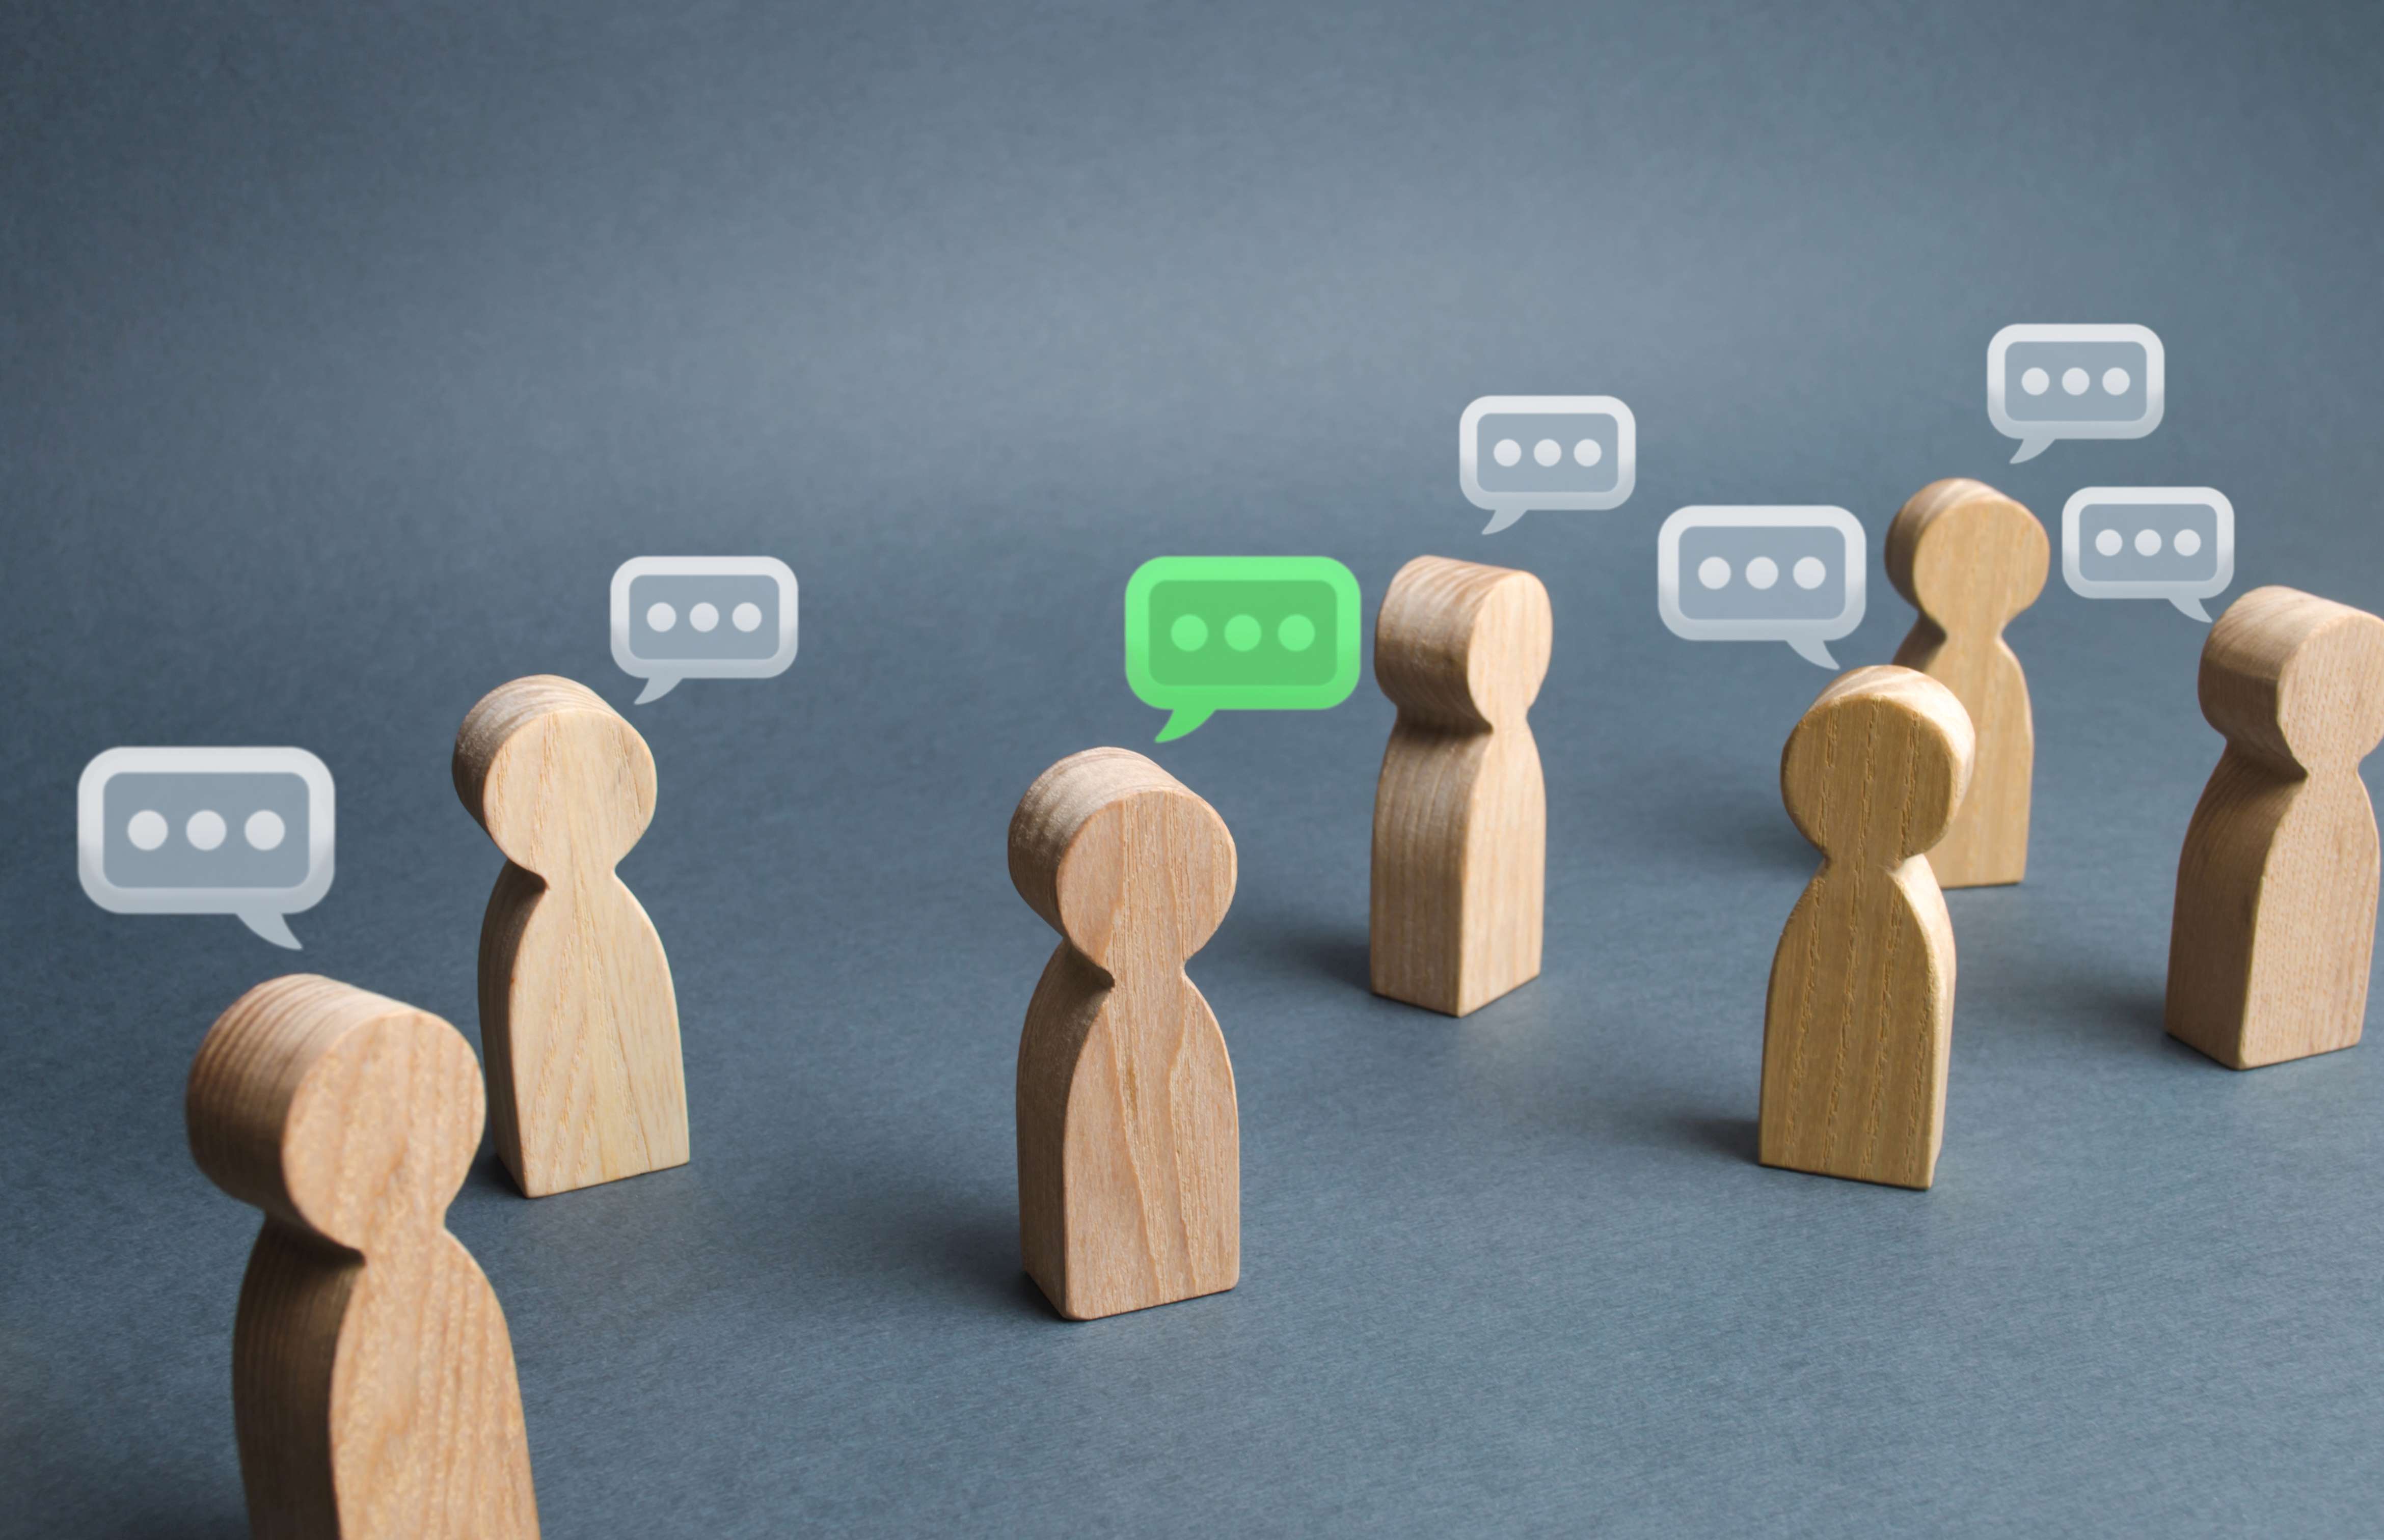 Little wooden people in a group with speech bubbles